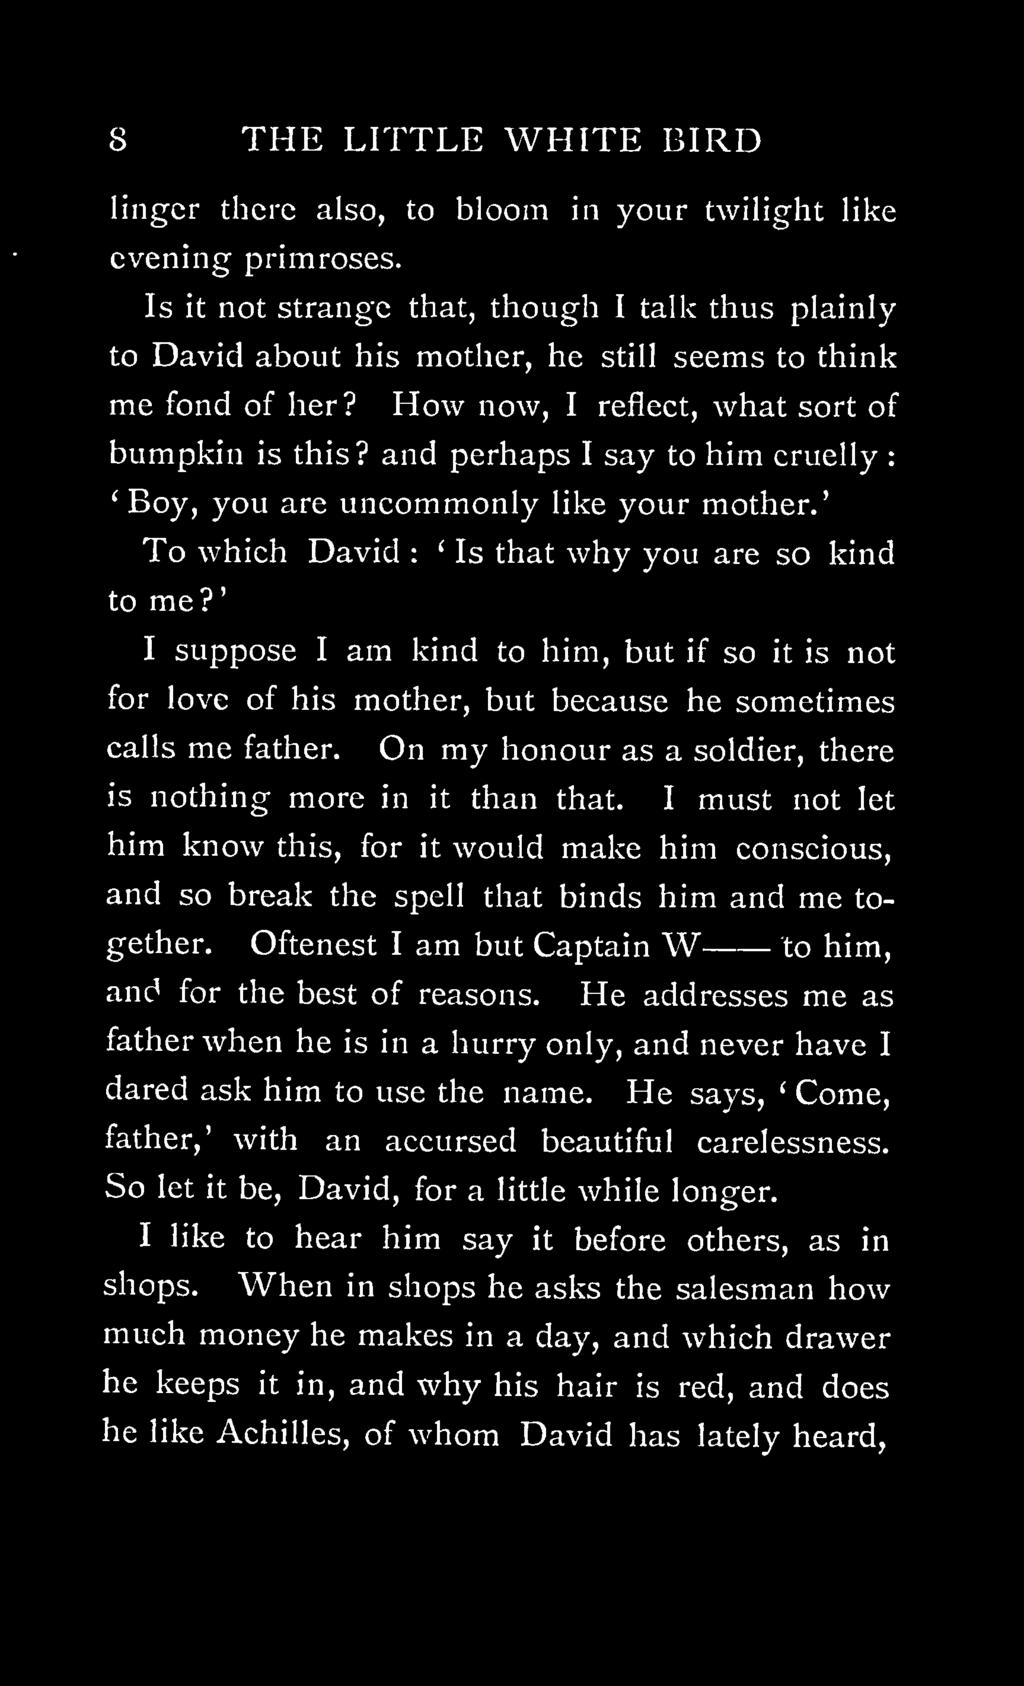 and perhaps I say to him cruelly : Boy, you are uncommonly like your mother. To which David : Is that why you are so kind to me?